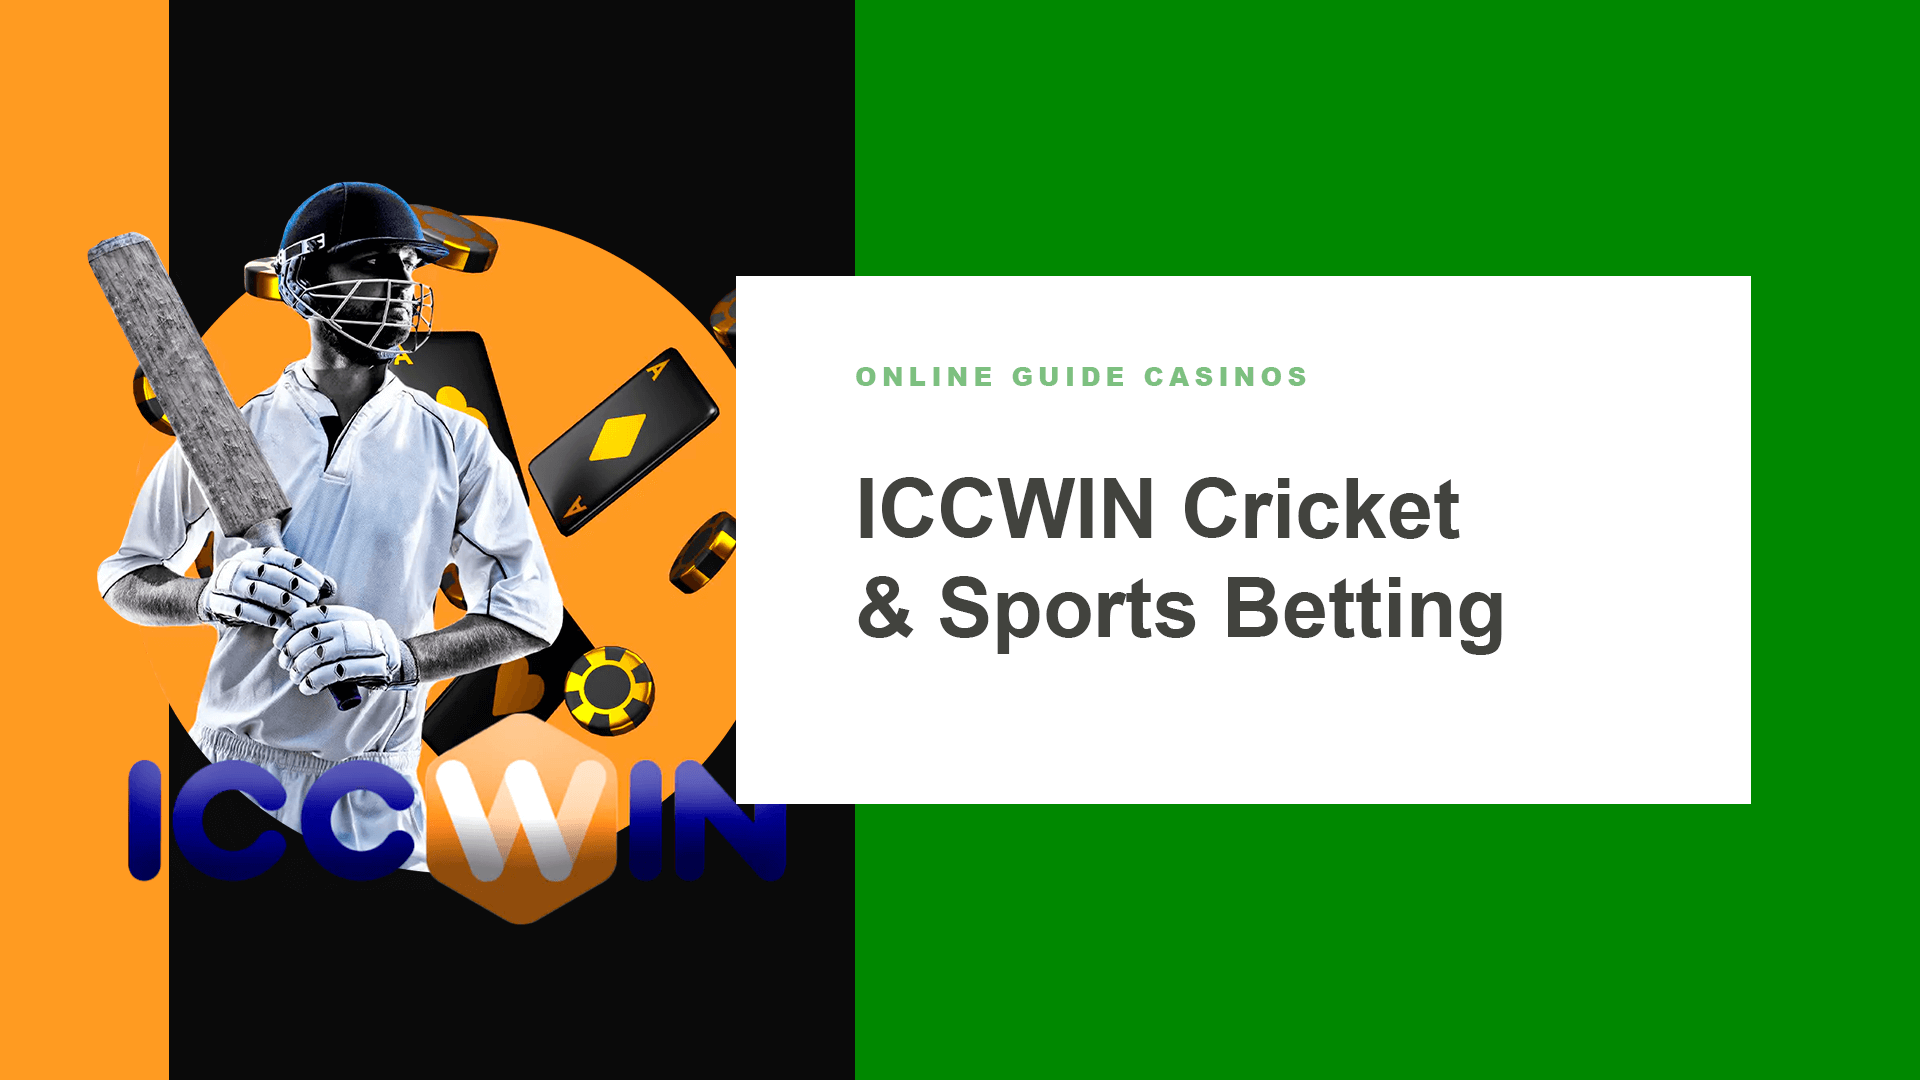 Choose IPLWin for Сricket and Sports Betting